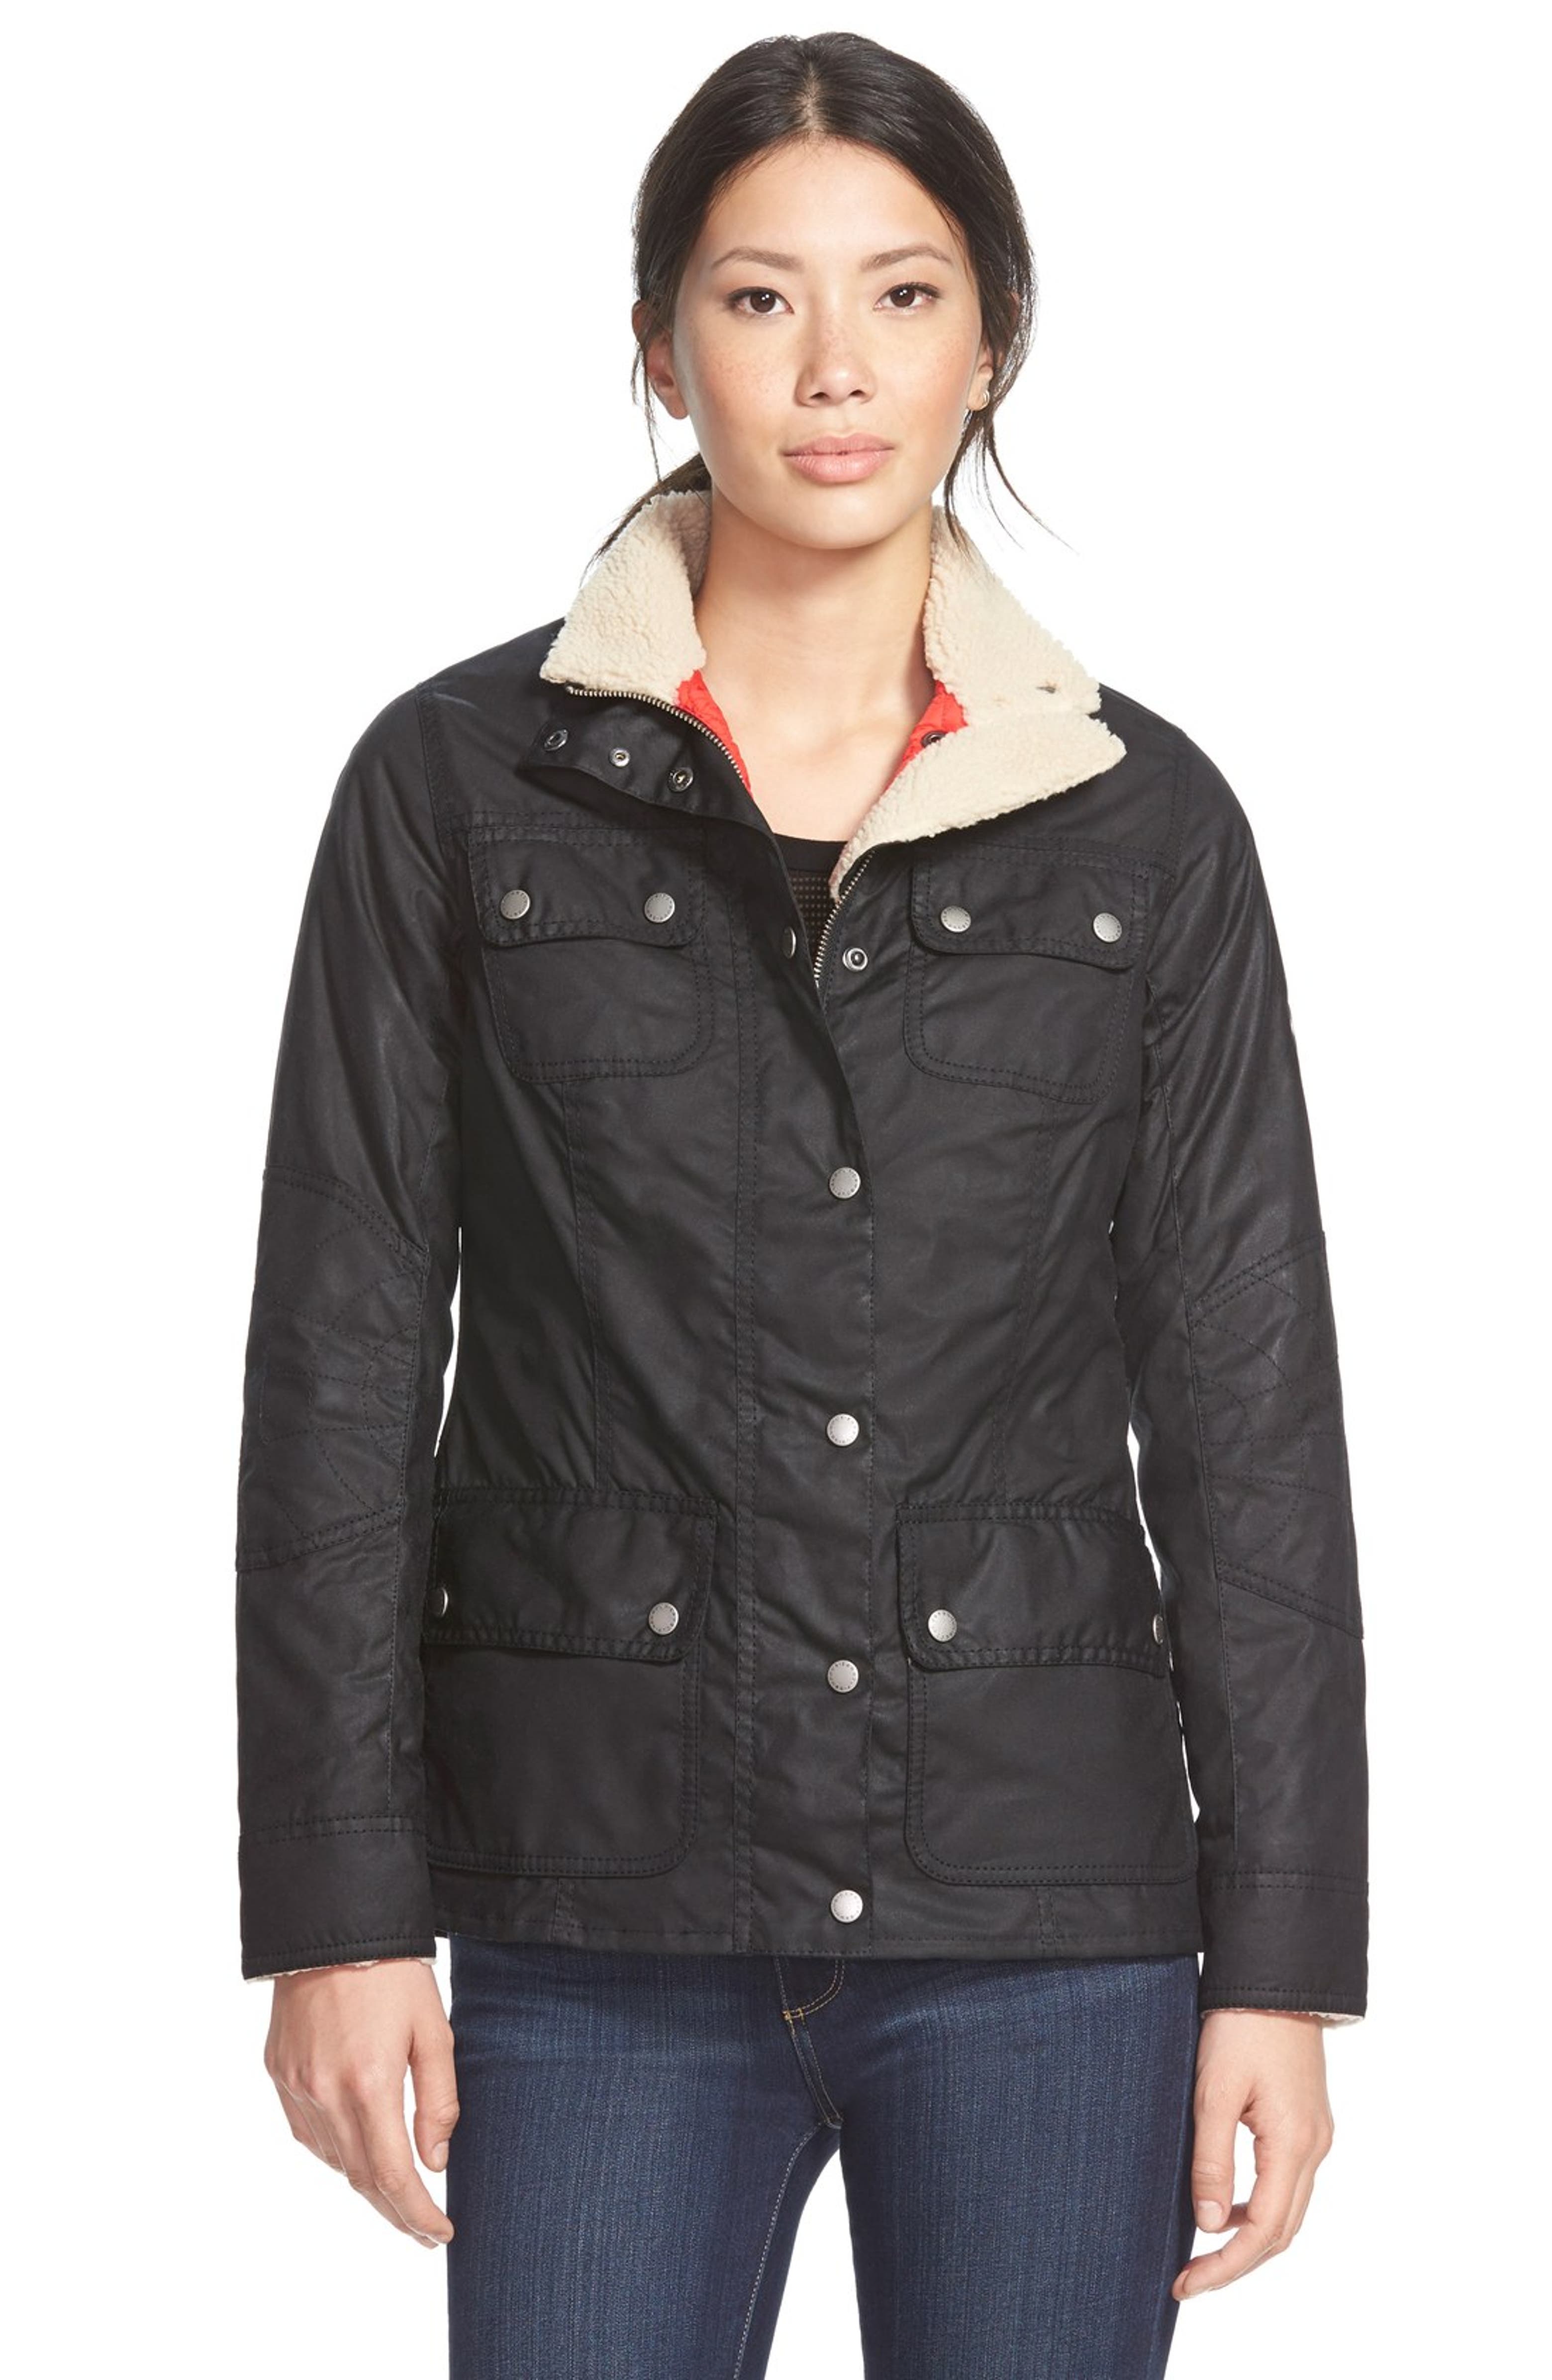 Barbour 'Bartlett' Faux Shearling Trim Waxed Cotton Jacket | Nordstrom